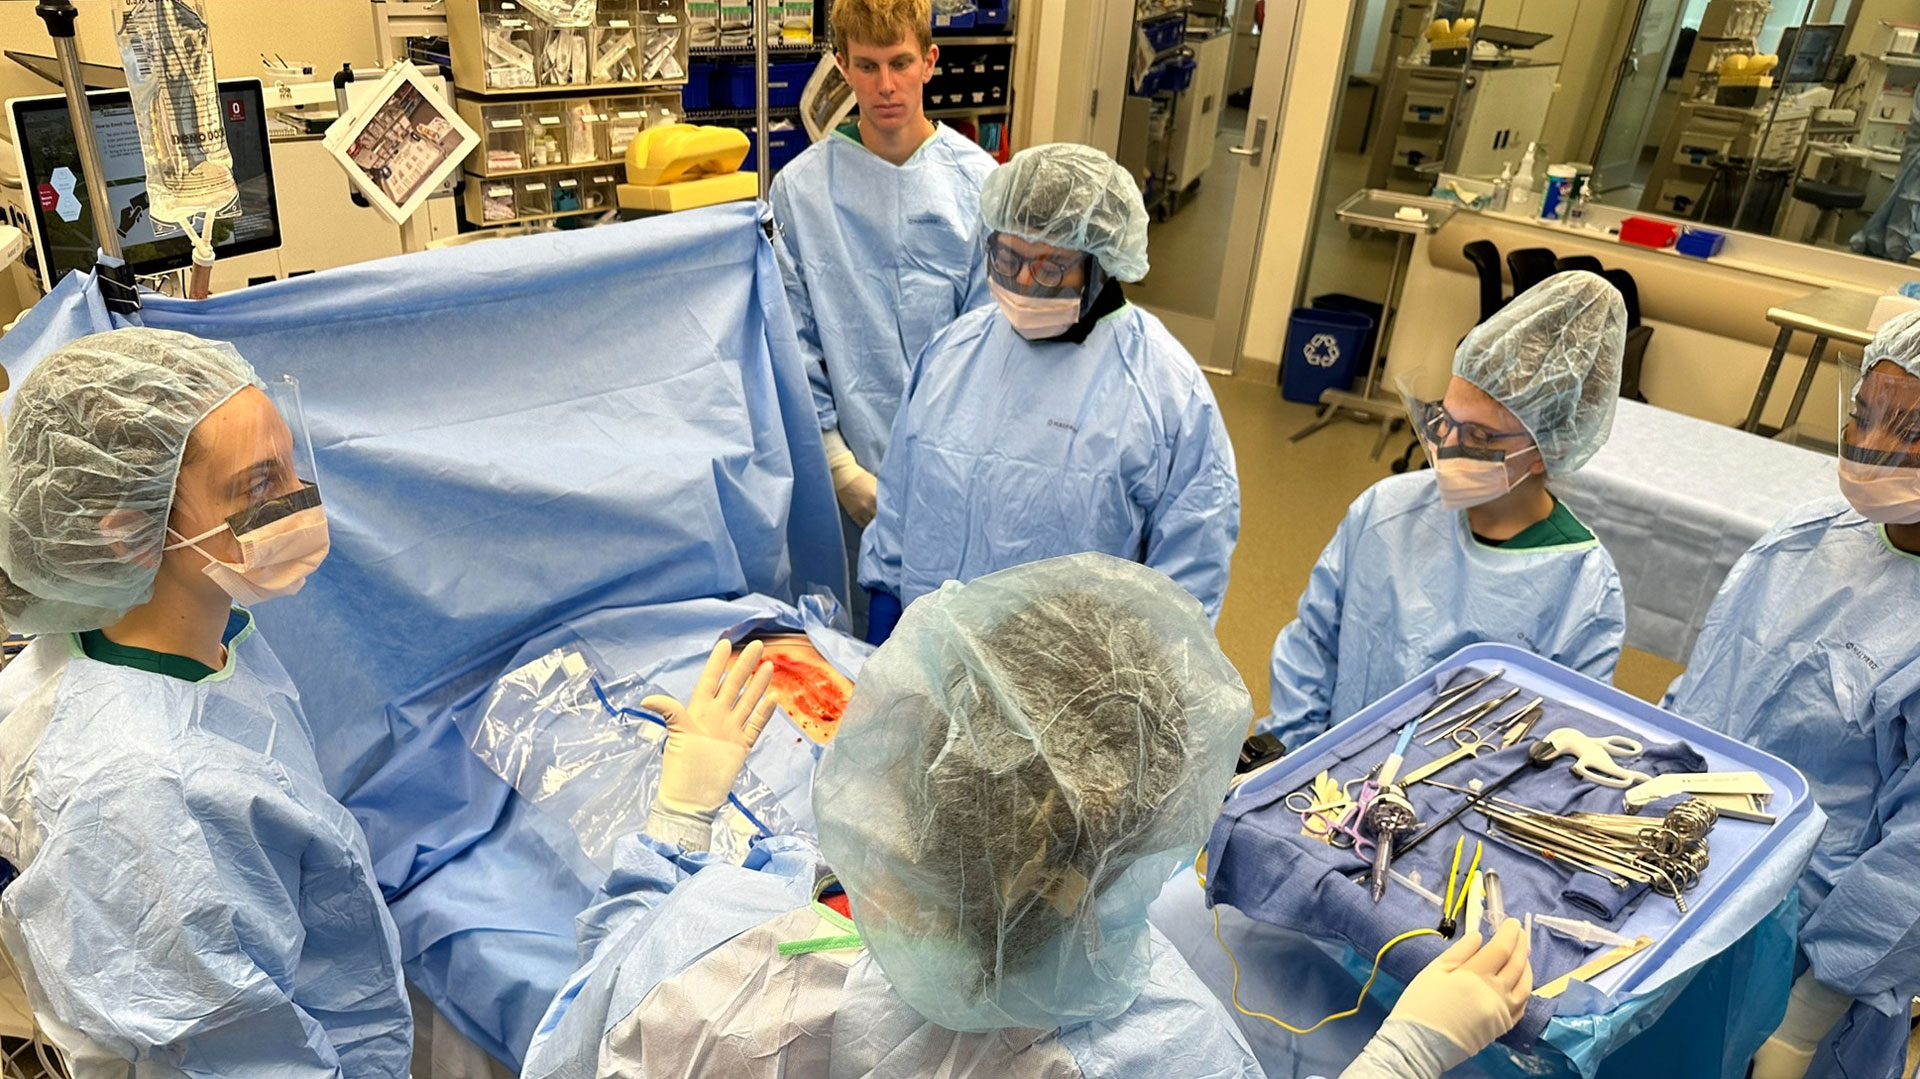 students learning in the operating room